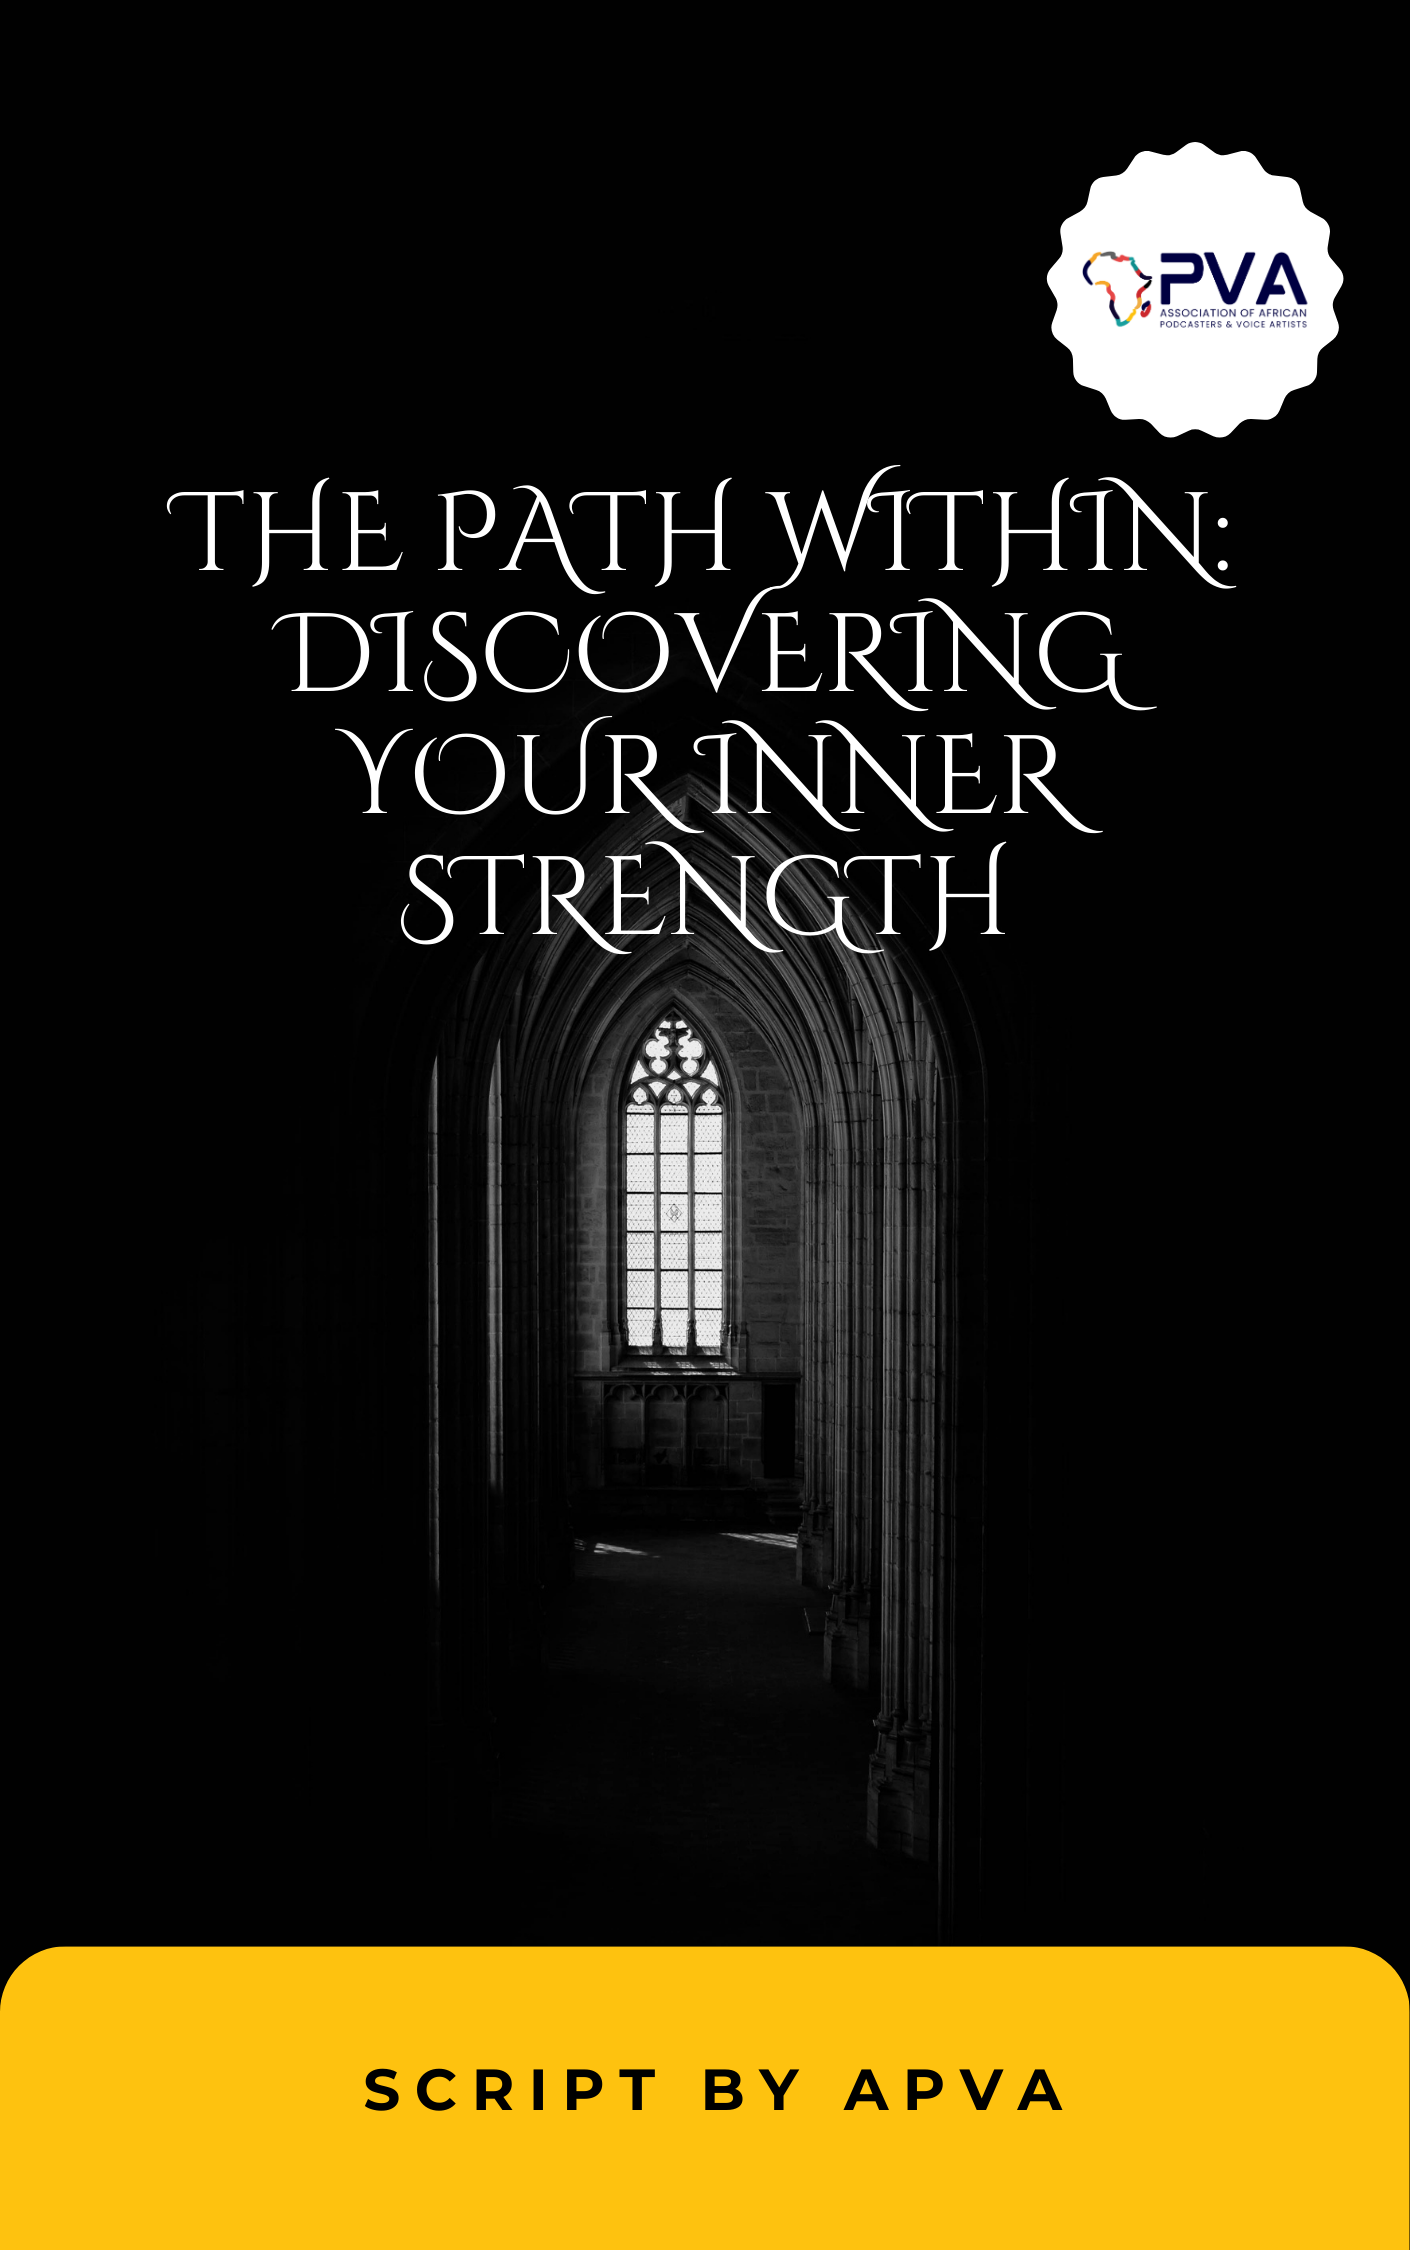 The Path Within: Discovering Your Inner Strength